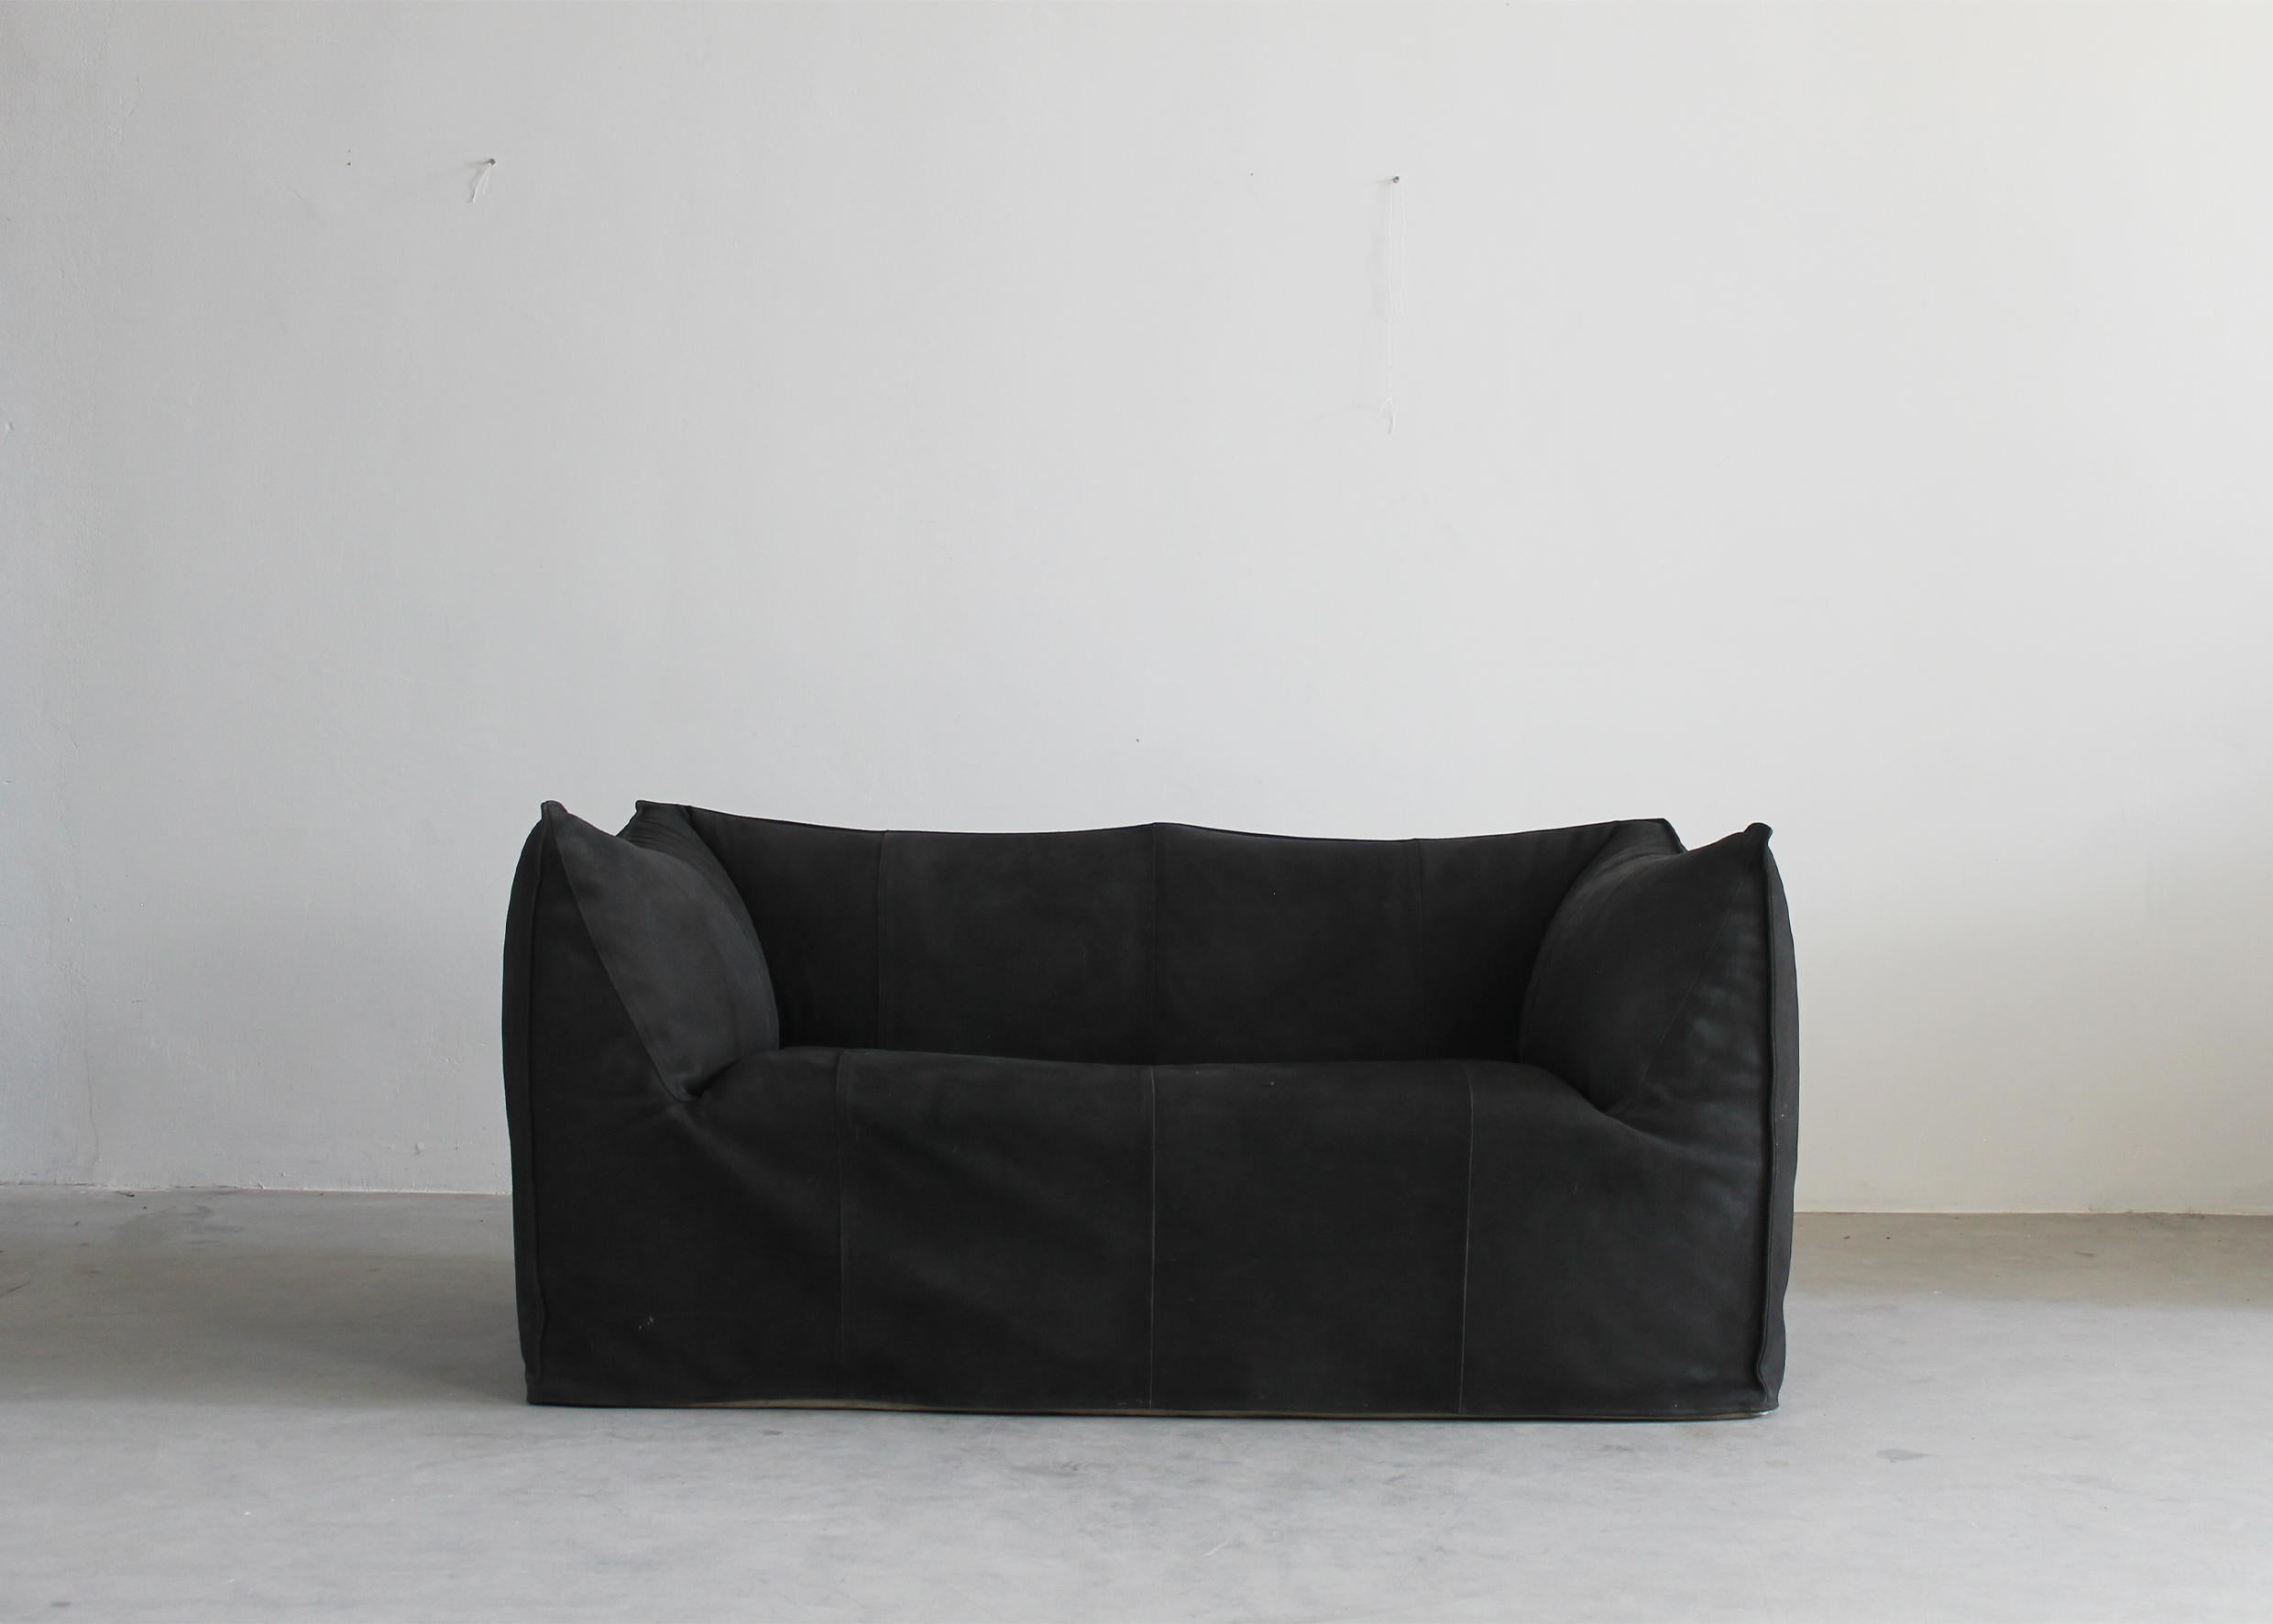 The iconic Le Bambole sofa (two.-seater) in black padded suede designed by Mario Bellini for B&B Italia 1972.

Le Bambole sofa is an icon of the Seventies and winner of the Compasso d’Oro in 1979.
Designed by 35-year-old Mario Bellini, this couch